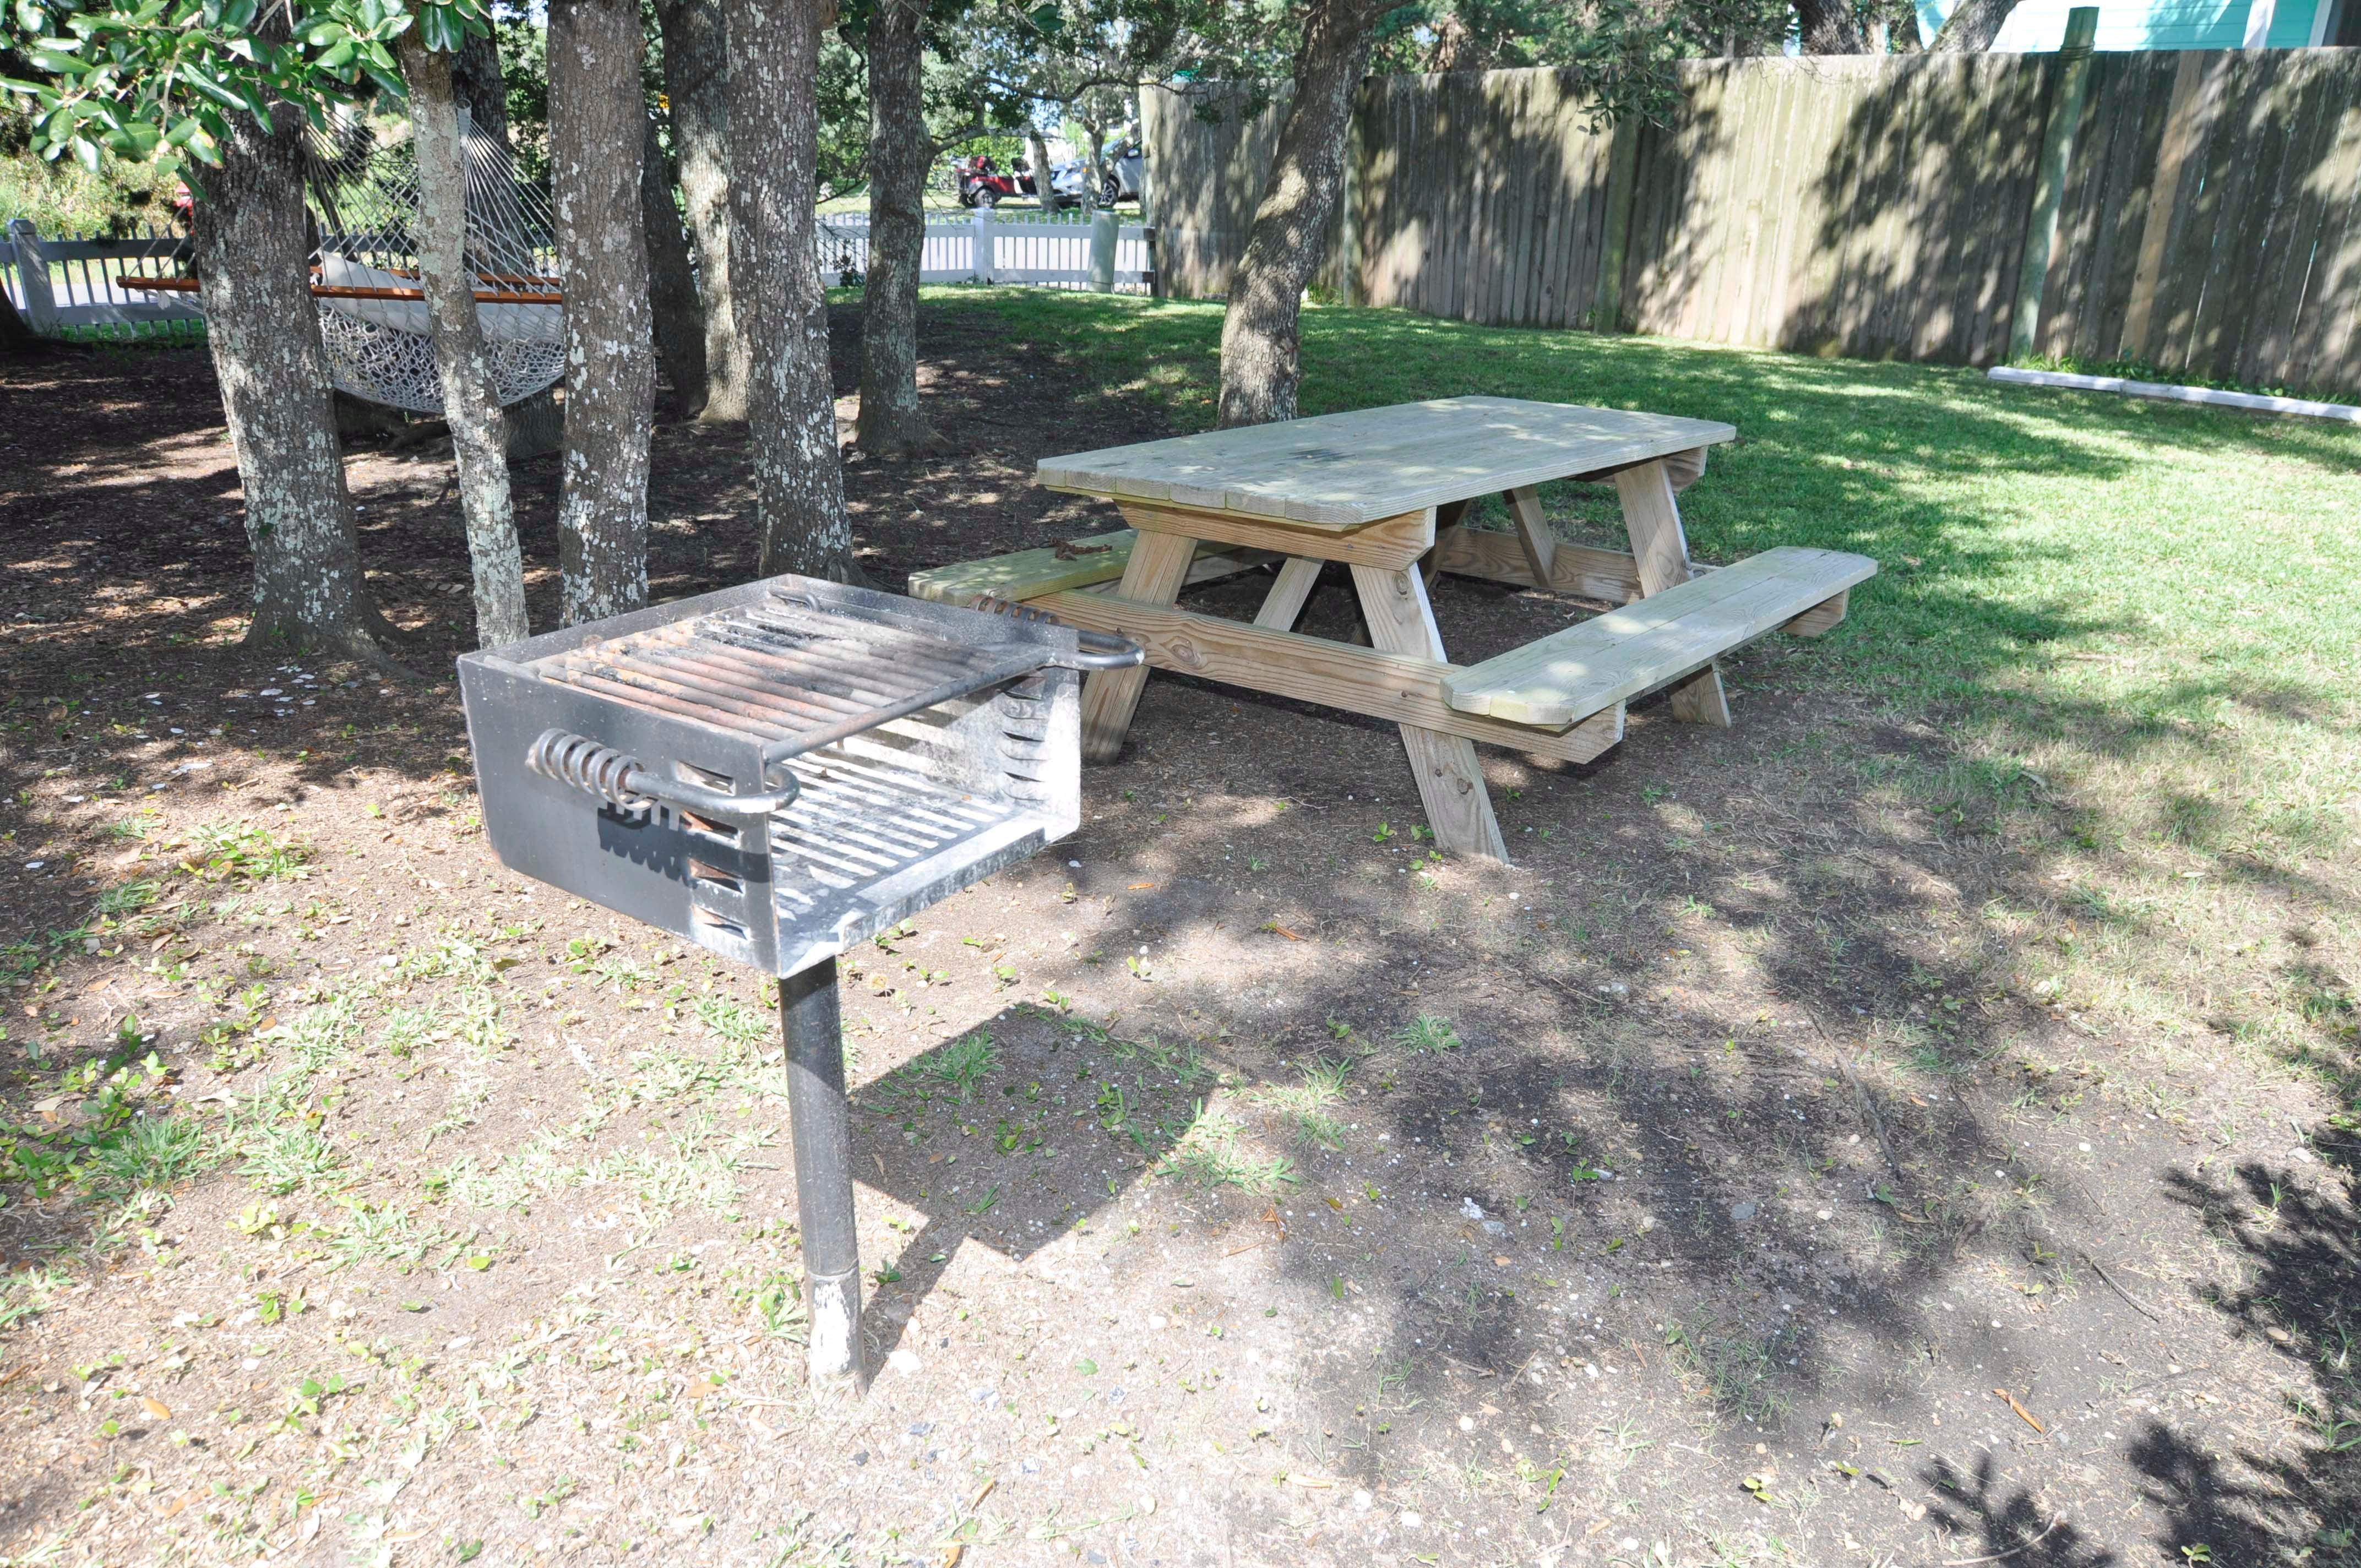 Park Style Grill and Picnic Table